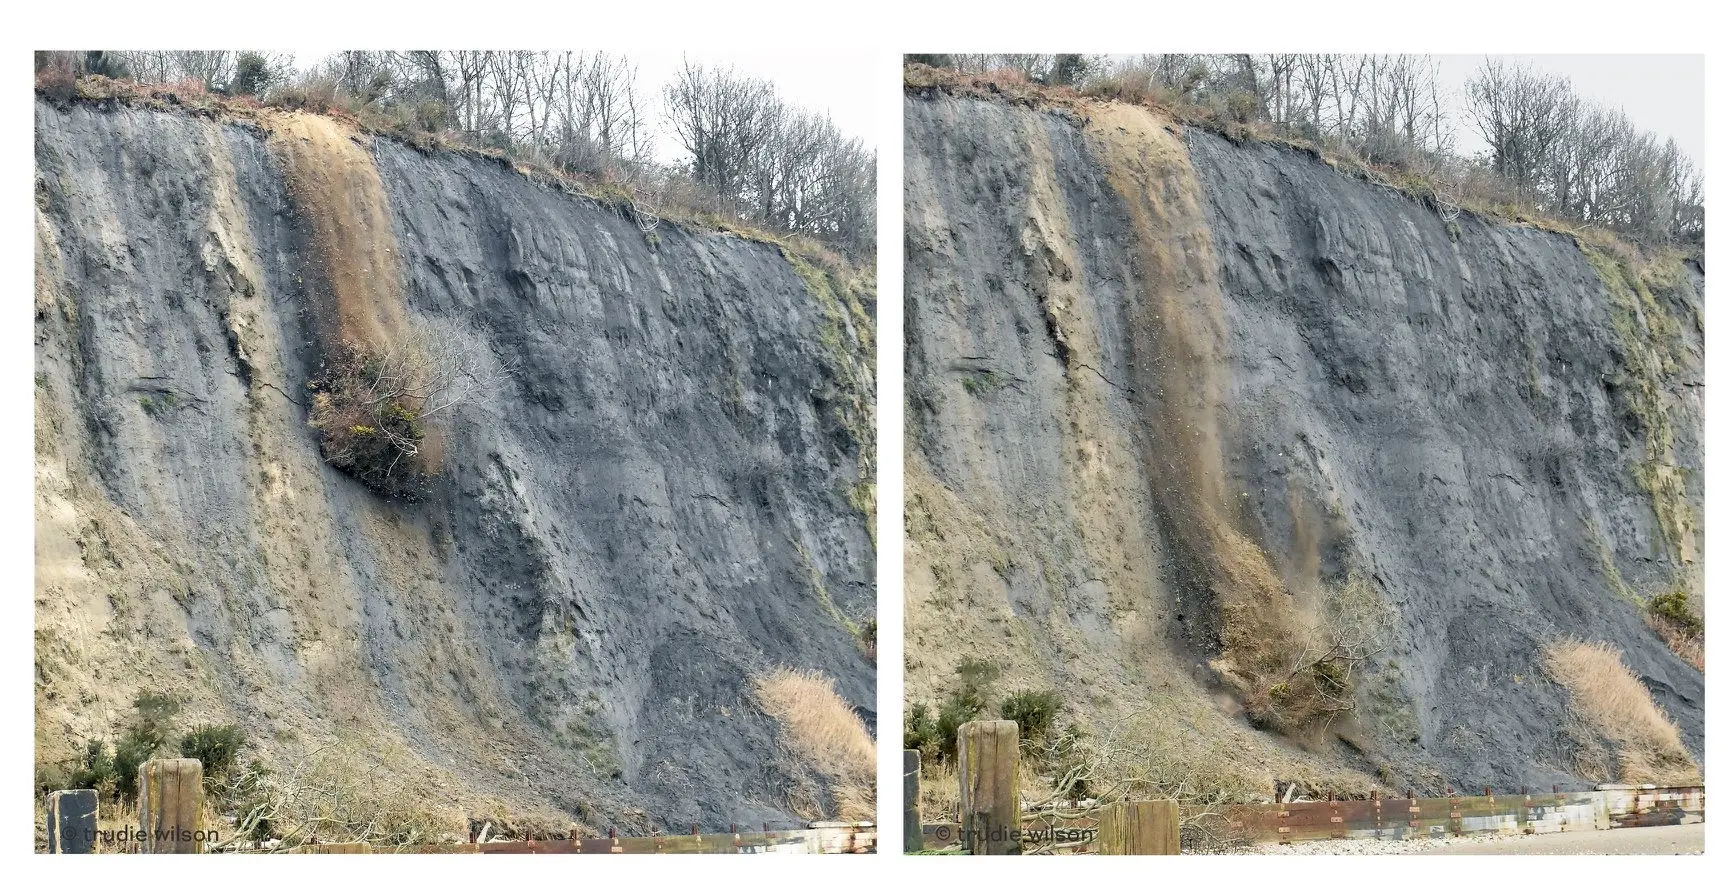 trudie wilson captured the cliff fall at Shanklin